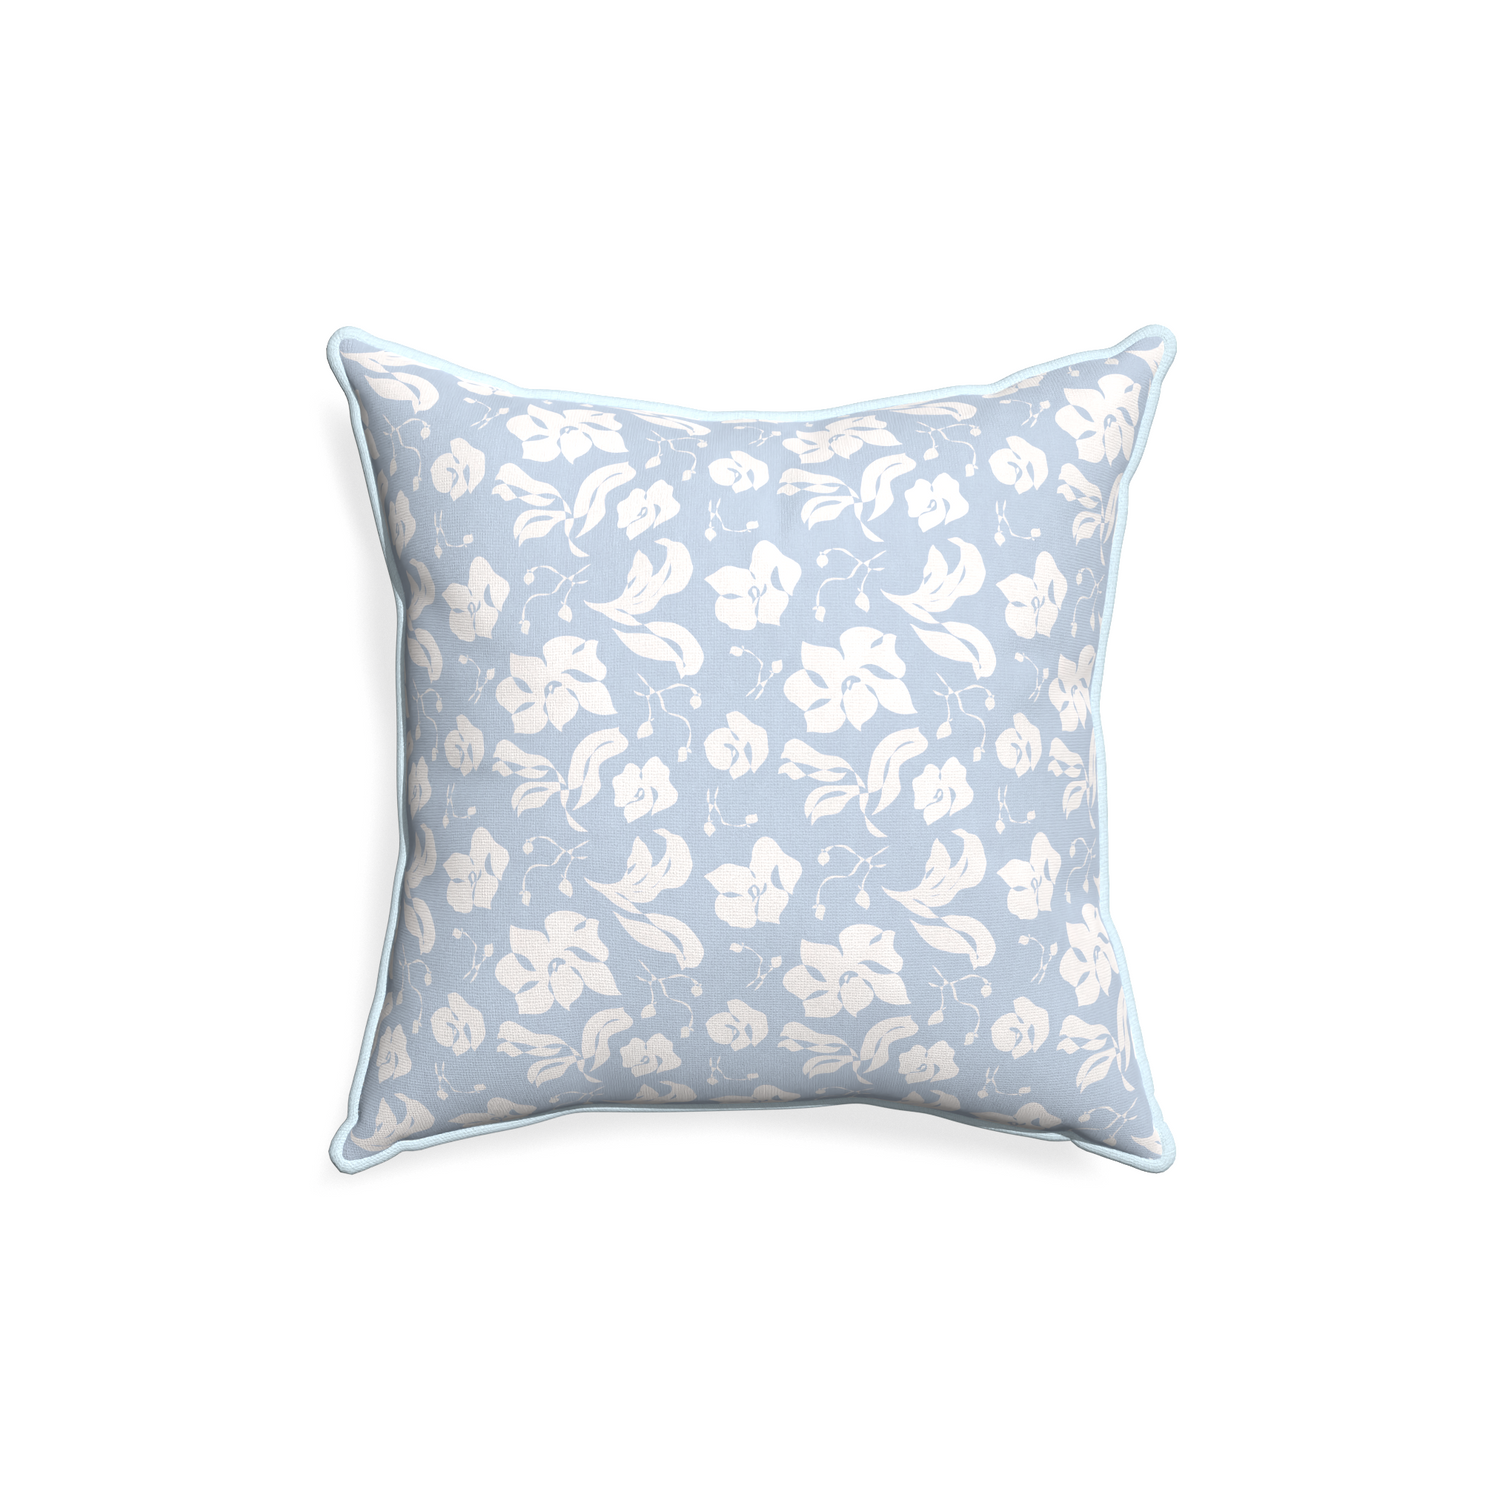 18-square georgia custom cornflower blue floralpillow with powder piping on white background